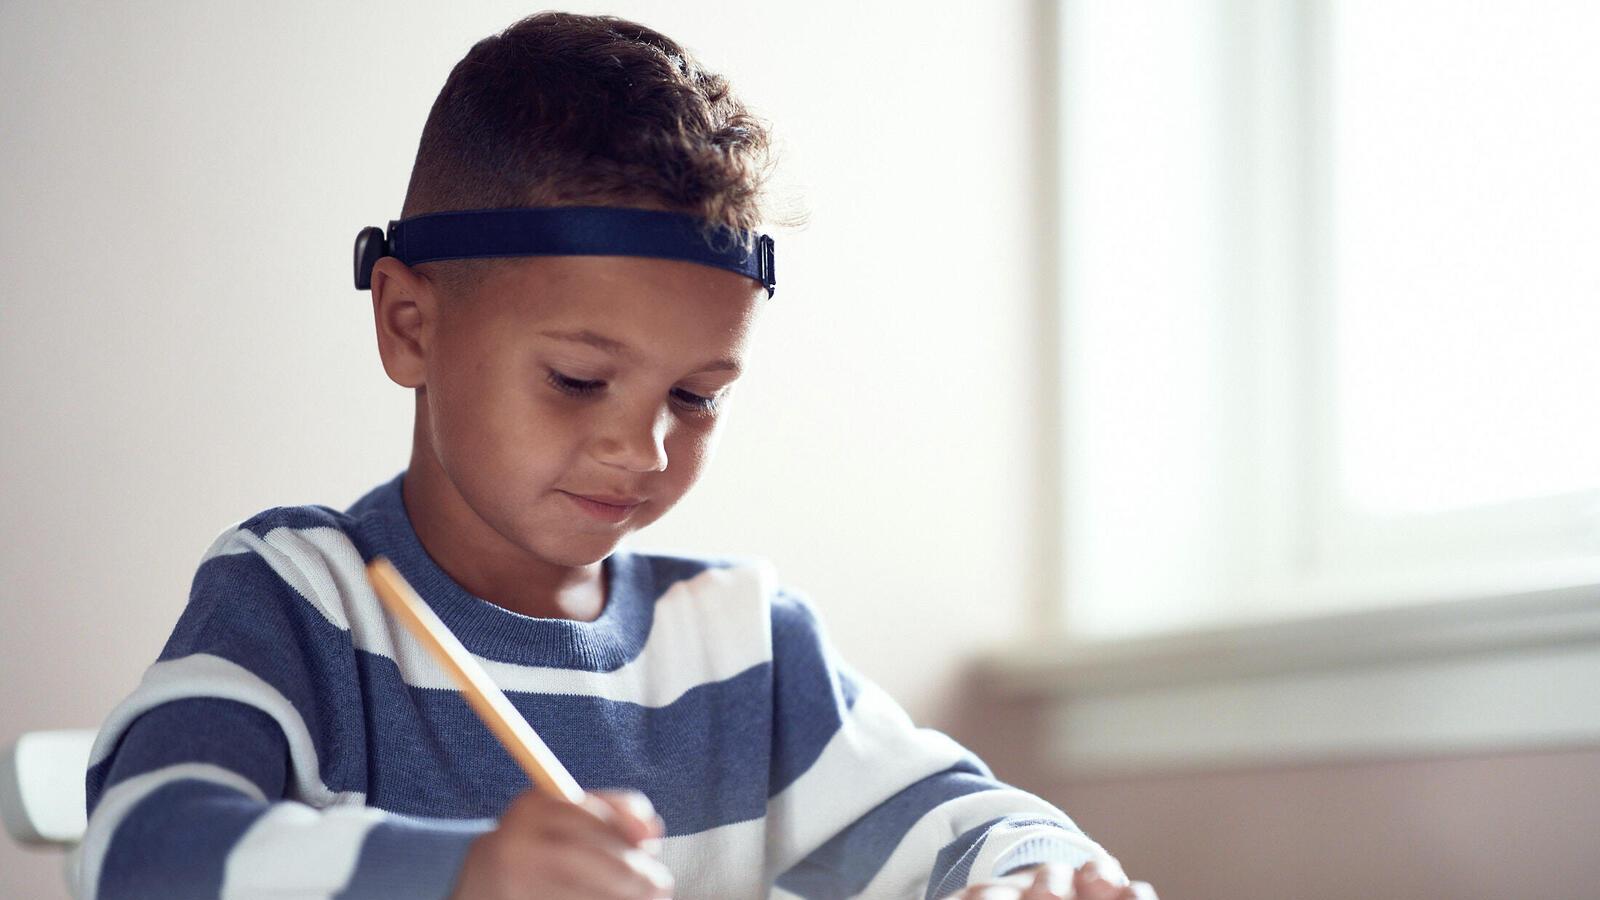 Young boy wearing a bone conduction device on a headband sitting drawing or writing